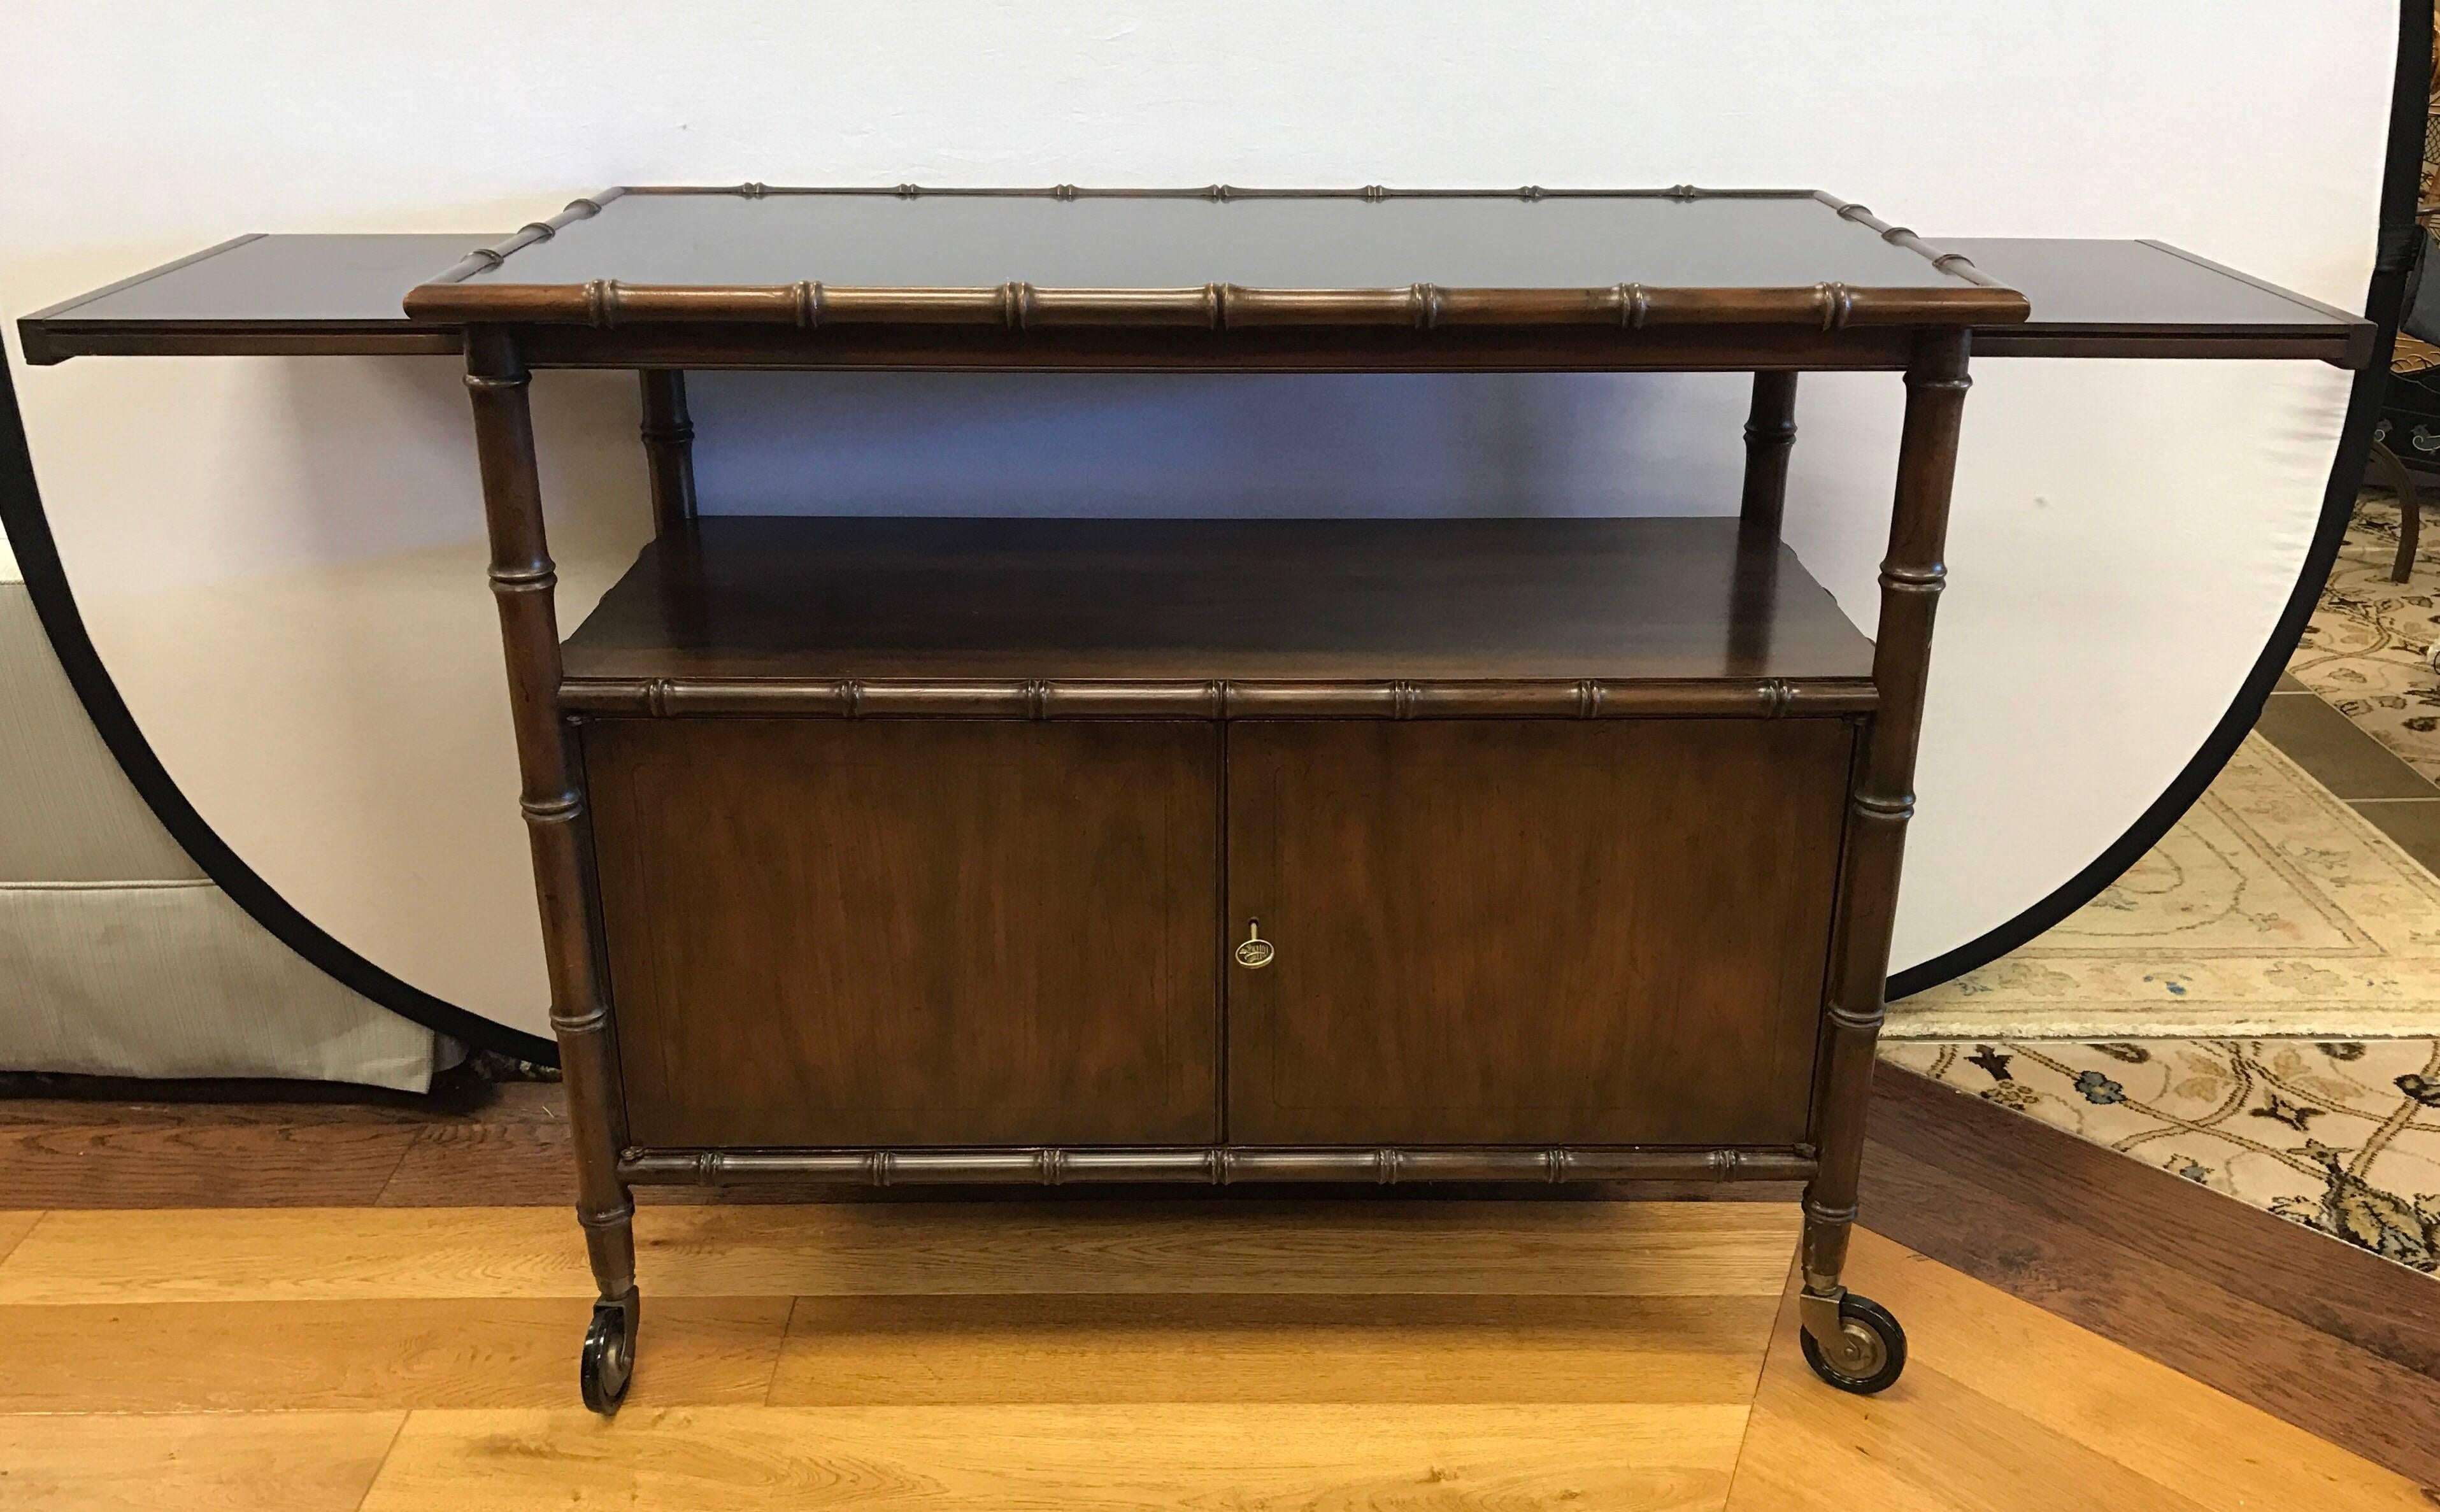 Midcentury chinoiserie faux bamboo rolling bar cart with pull-out sides that expand to 64 inches. Bottom has two doors with working lock and key. Top is black laminate. Baker medallion inside left drawer.